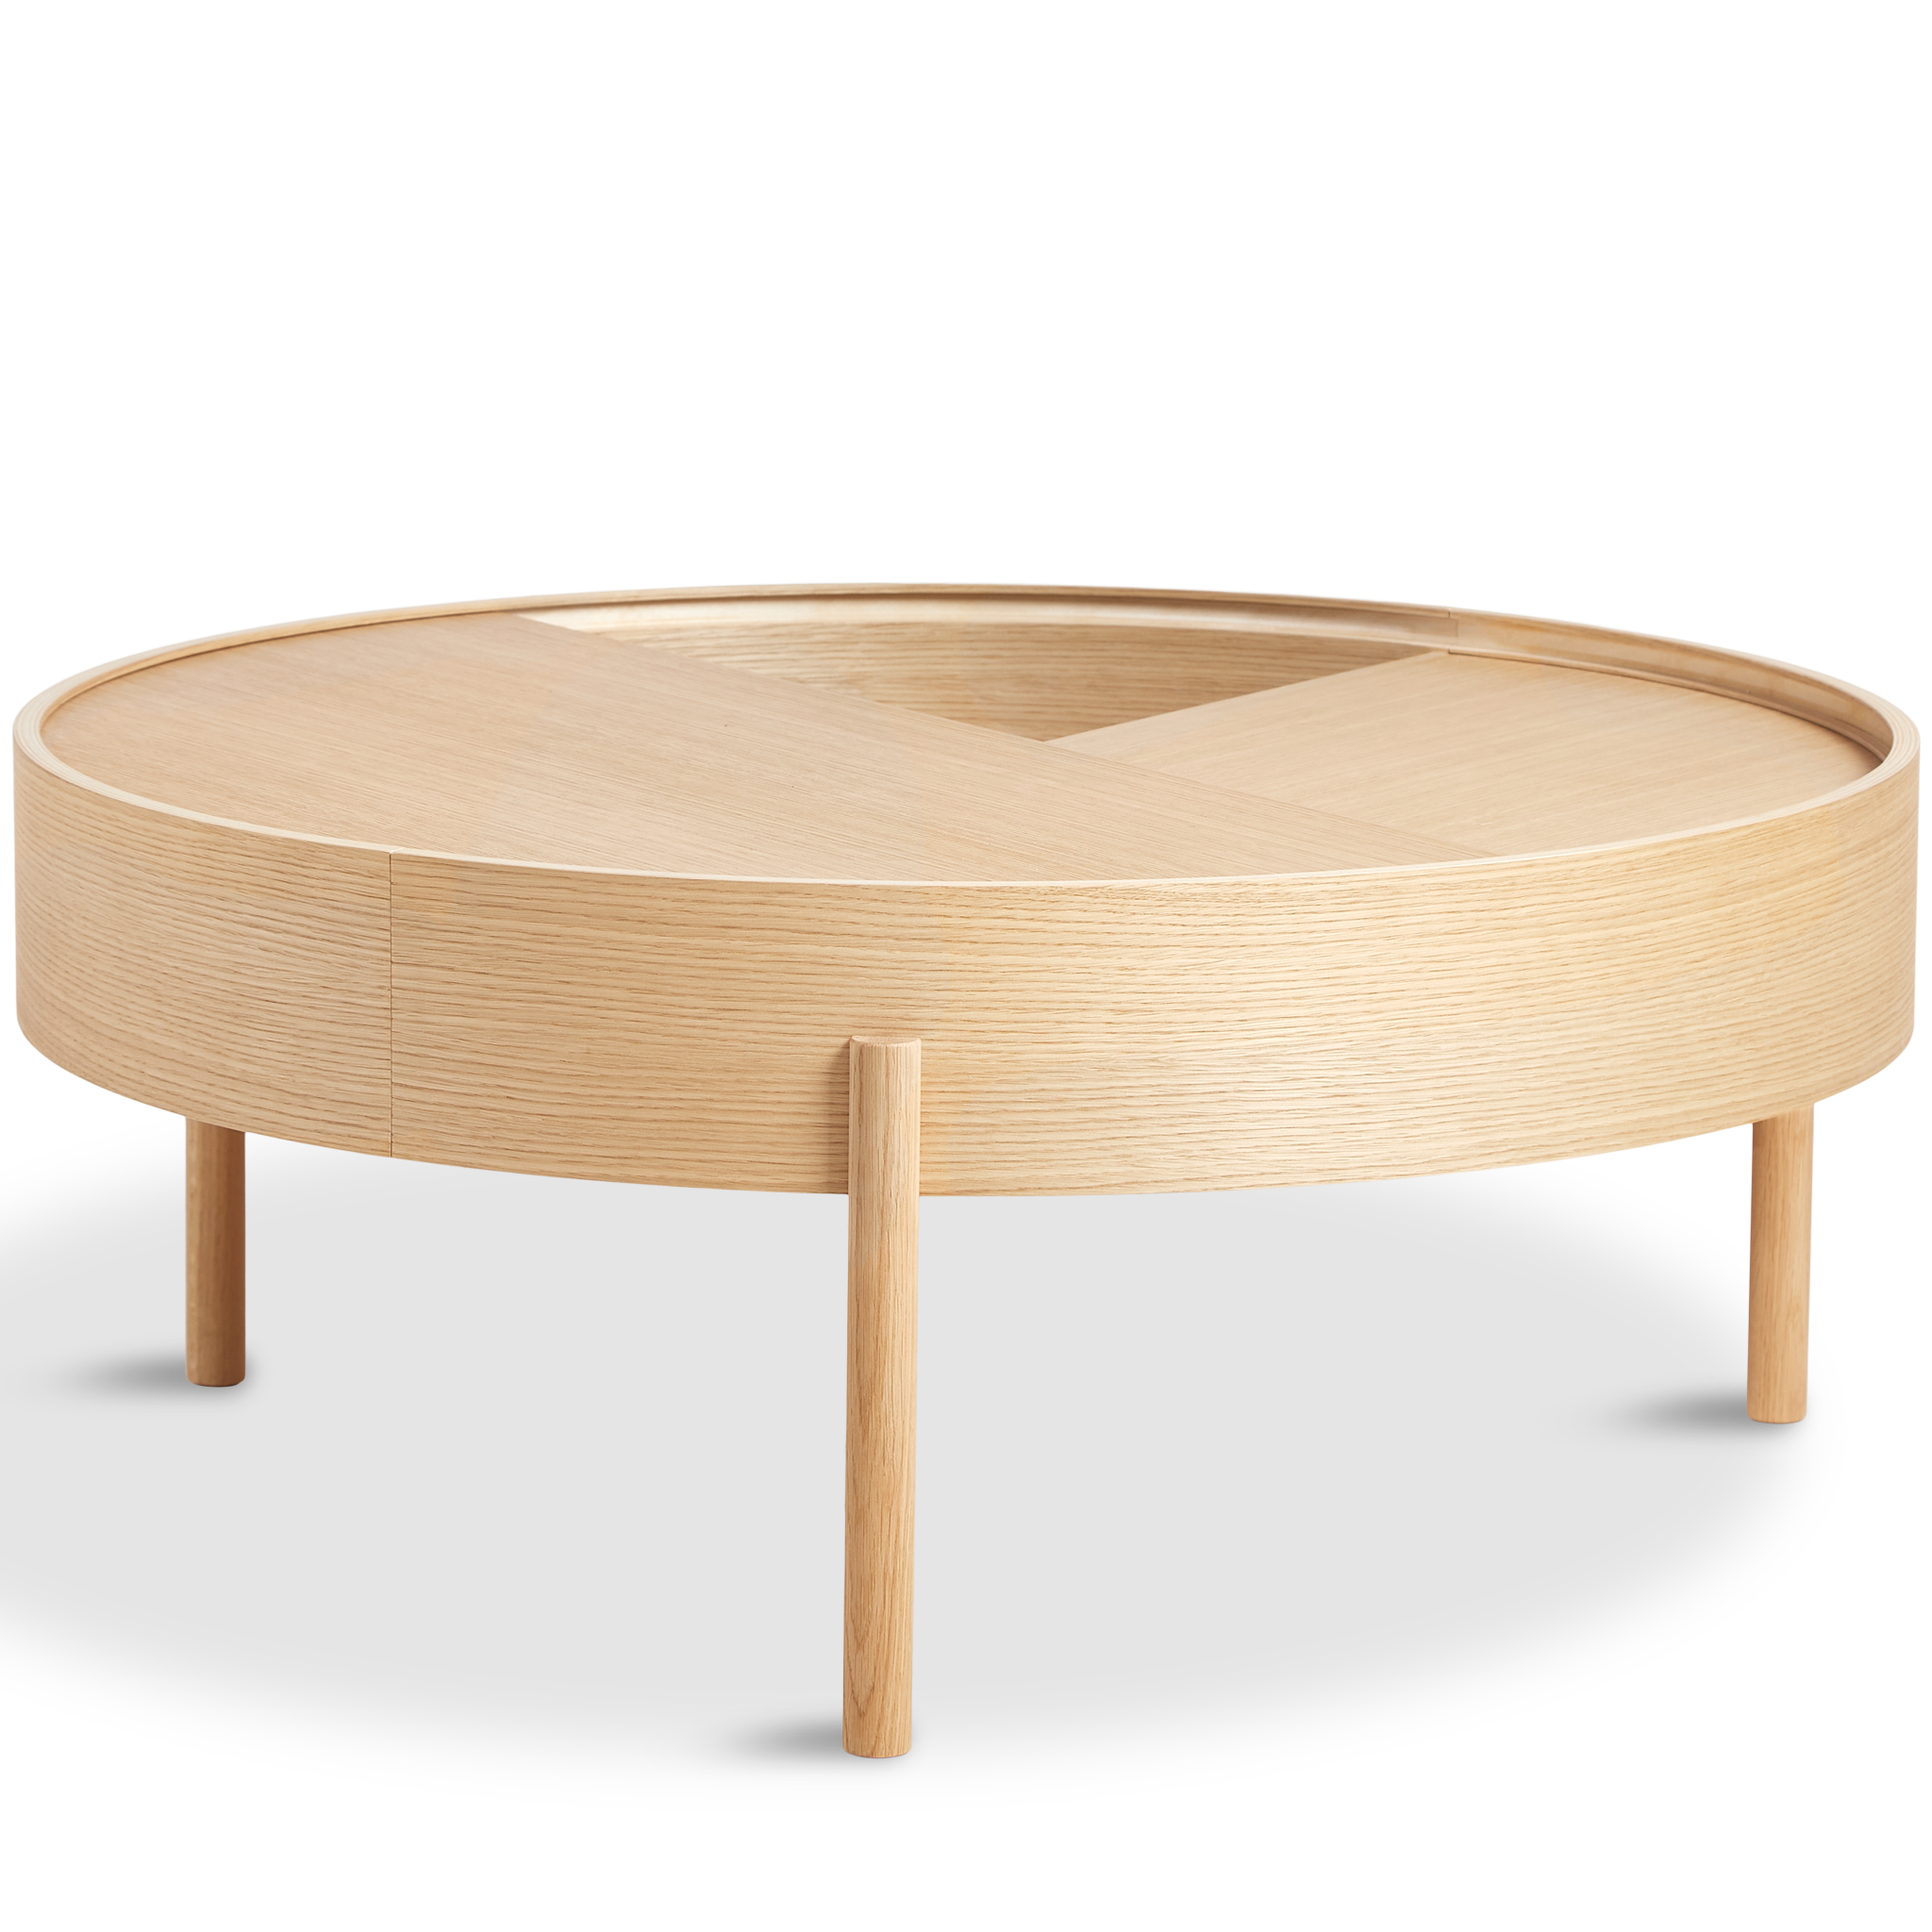 arc coffee table (89 cm) - white pigmented lacquered oak by woud at adorn.house